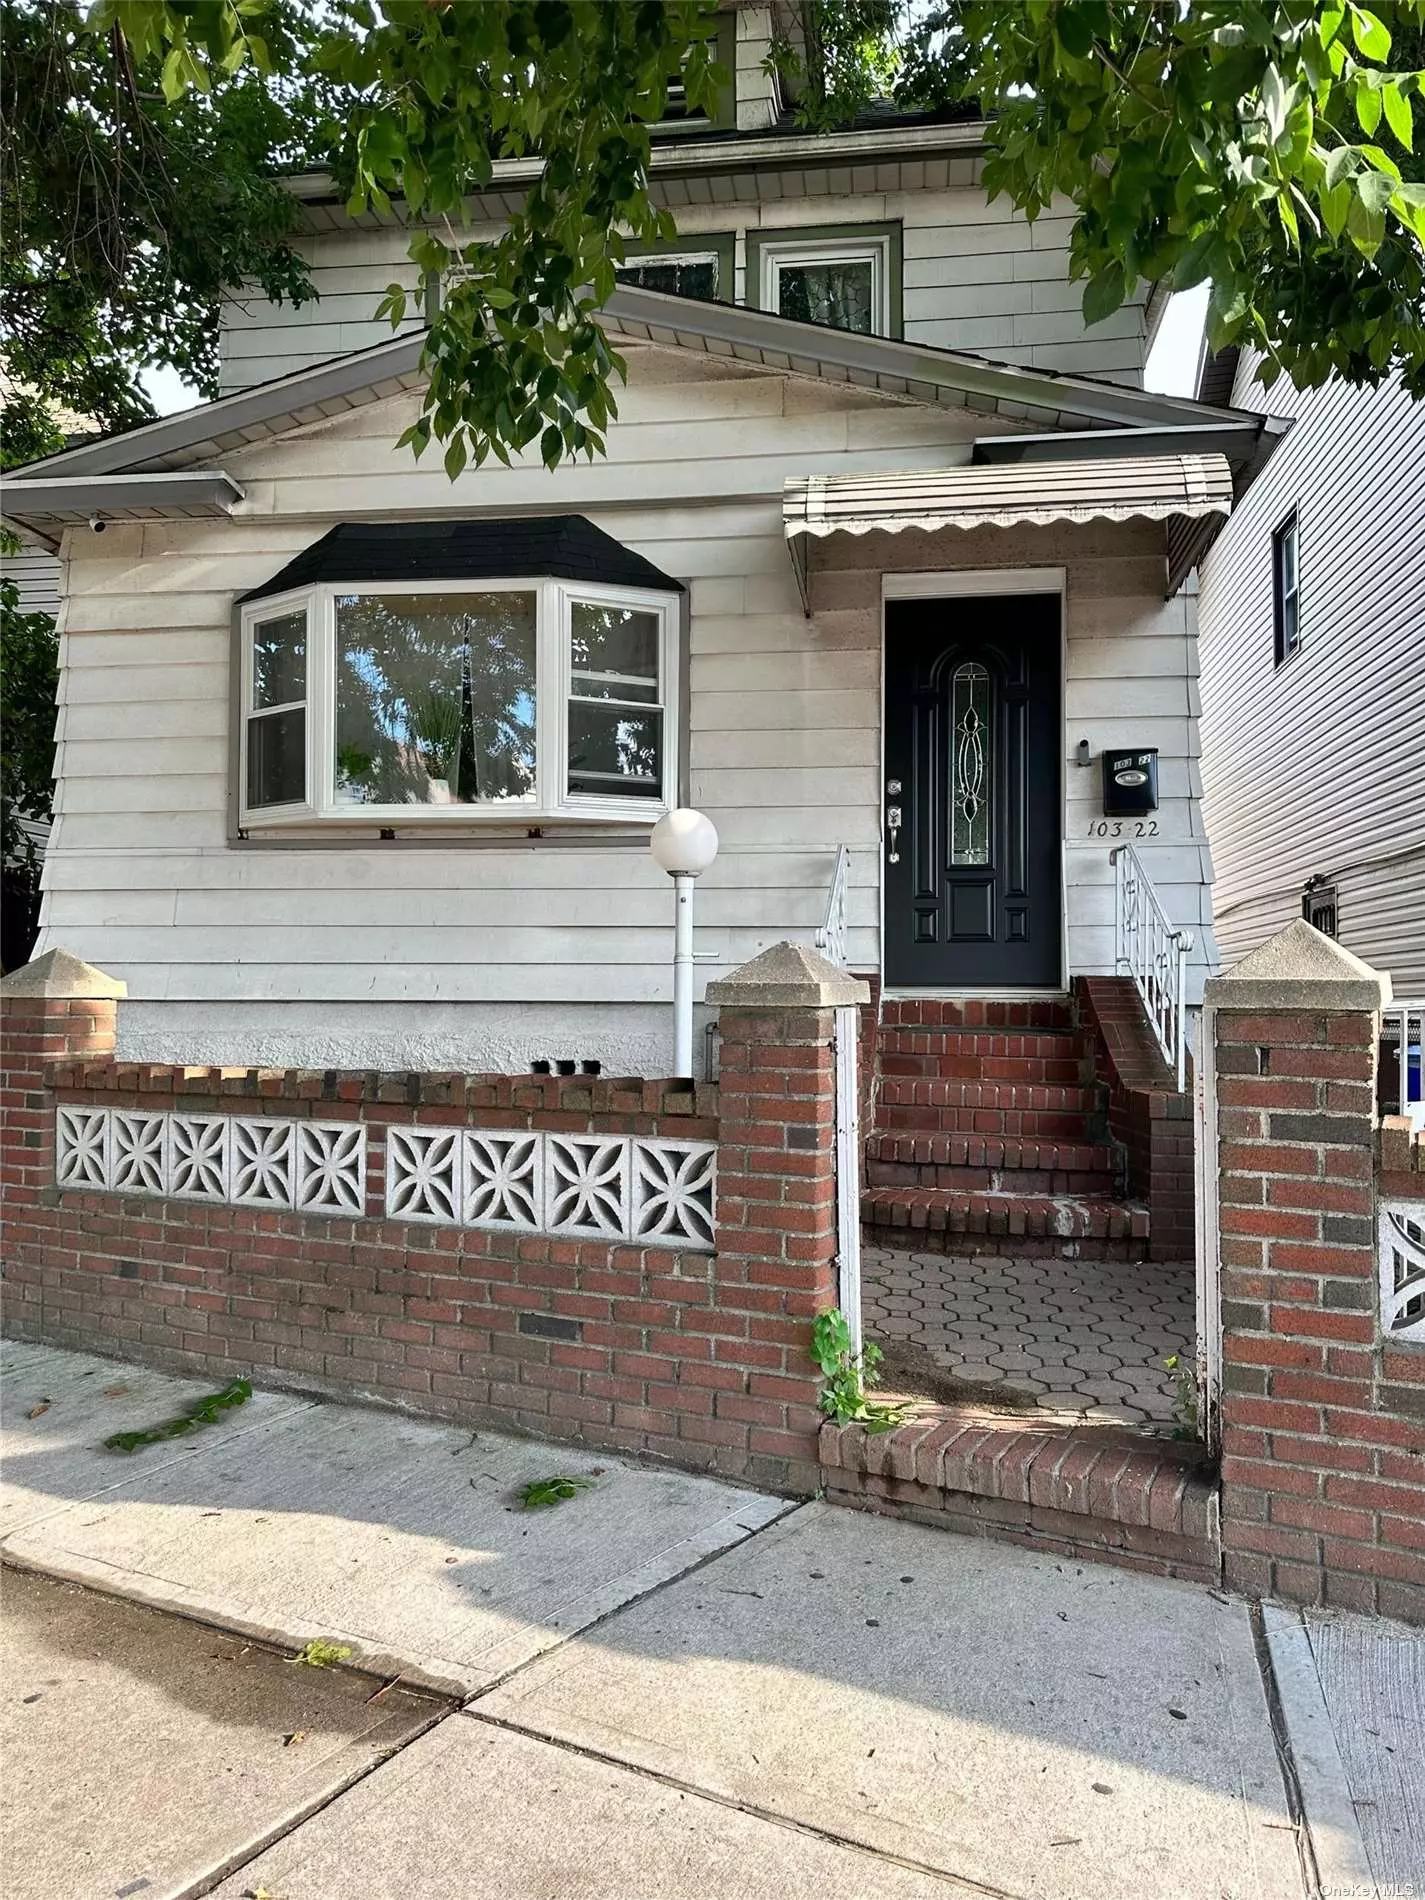 This is a 1 family house on a lot of R-6B/C2-3 Zoning, Finished basement, can build a structure of 4 levels mixed-use commercial building. Next door, corner lots is a 2 family house with the same zoning for sale too. Minutes away from nearby eateries, Skyview mall, Citi field, and Flushing (bus Q19). Close to the Grand Central Parkway, and minutes away from the LaGuardia Airport. Don&rsquo;t miss out on this great investment opportunity.